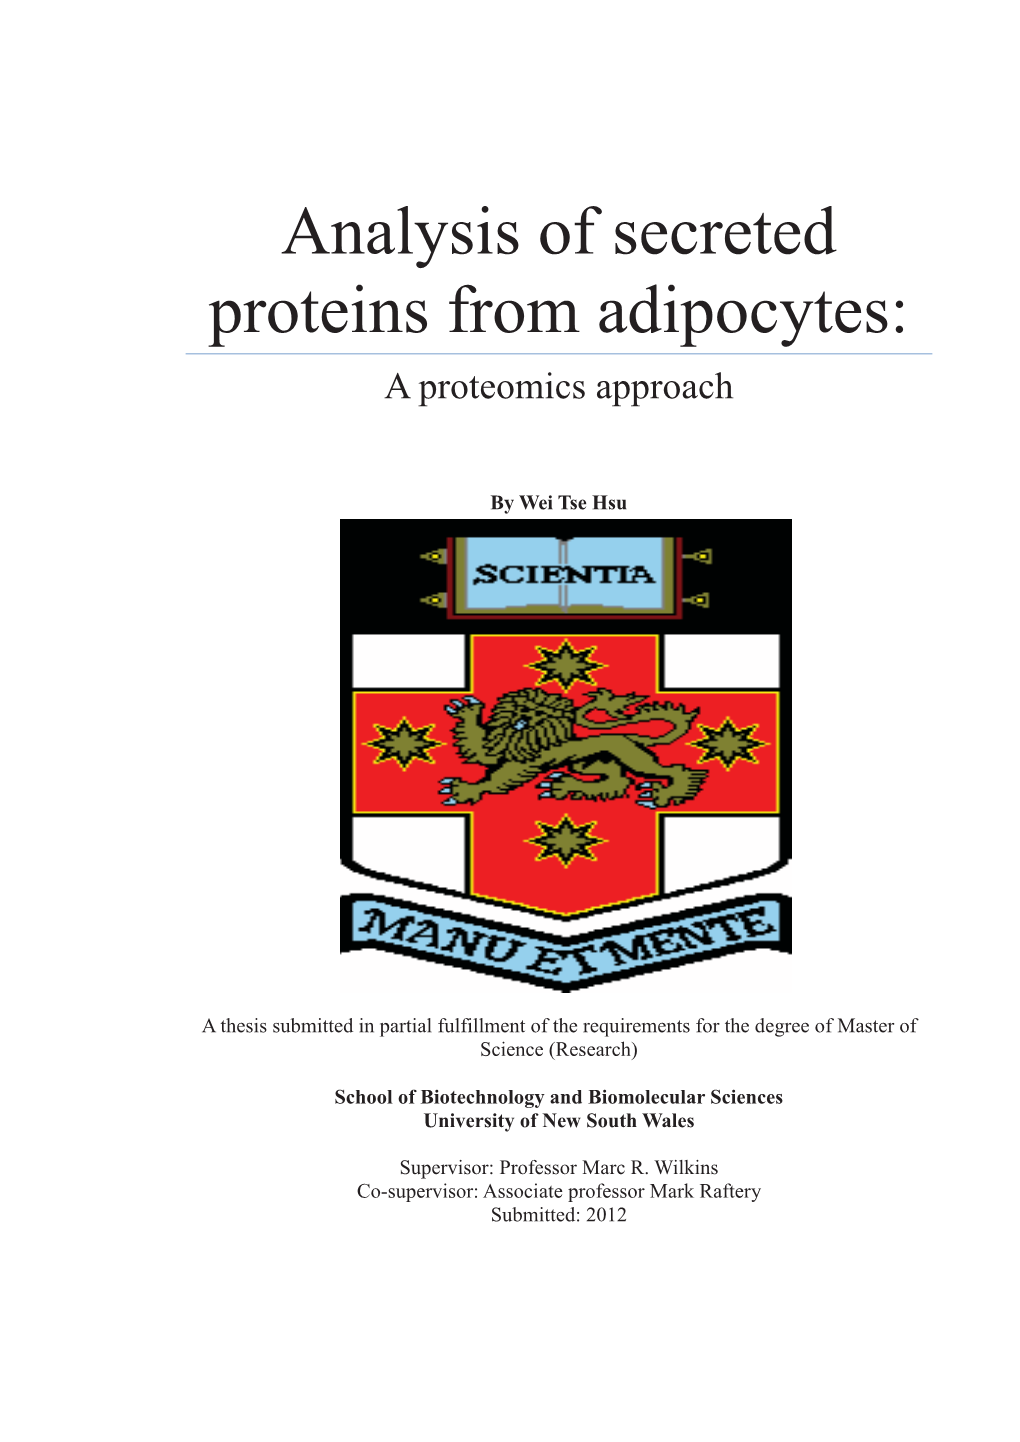 Analysis of Secreted Proteins from Adipocytes: a Proteomics Approach